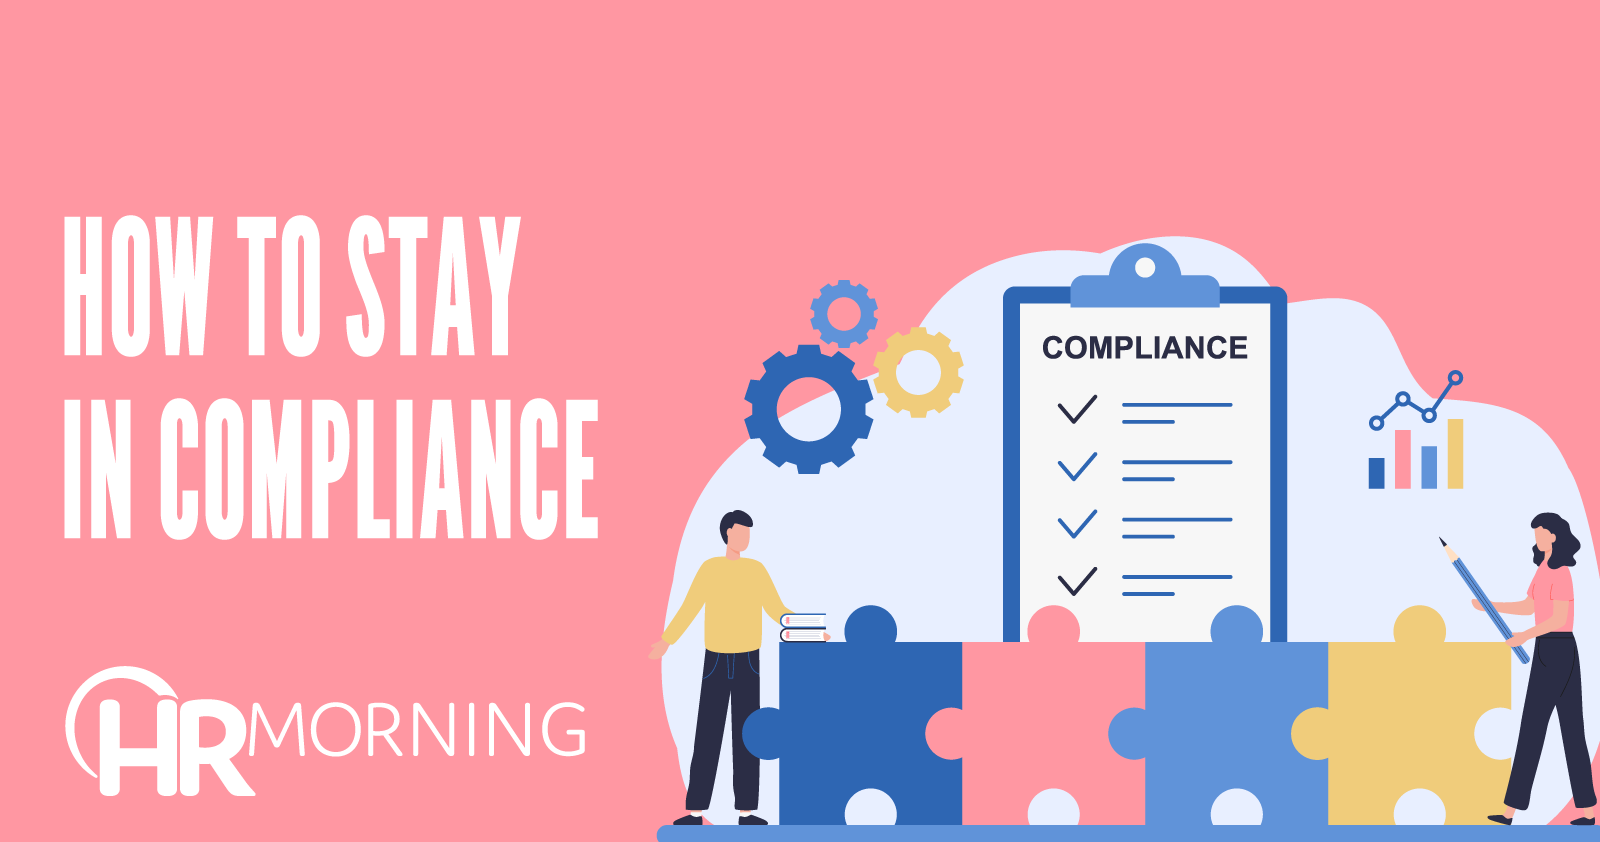 How To Stay In Compliance